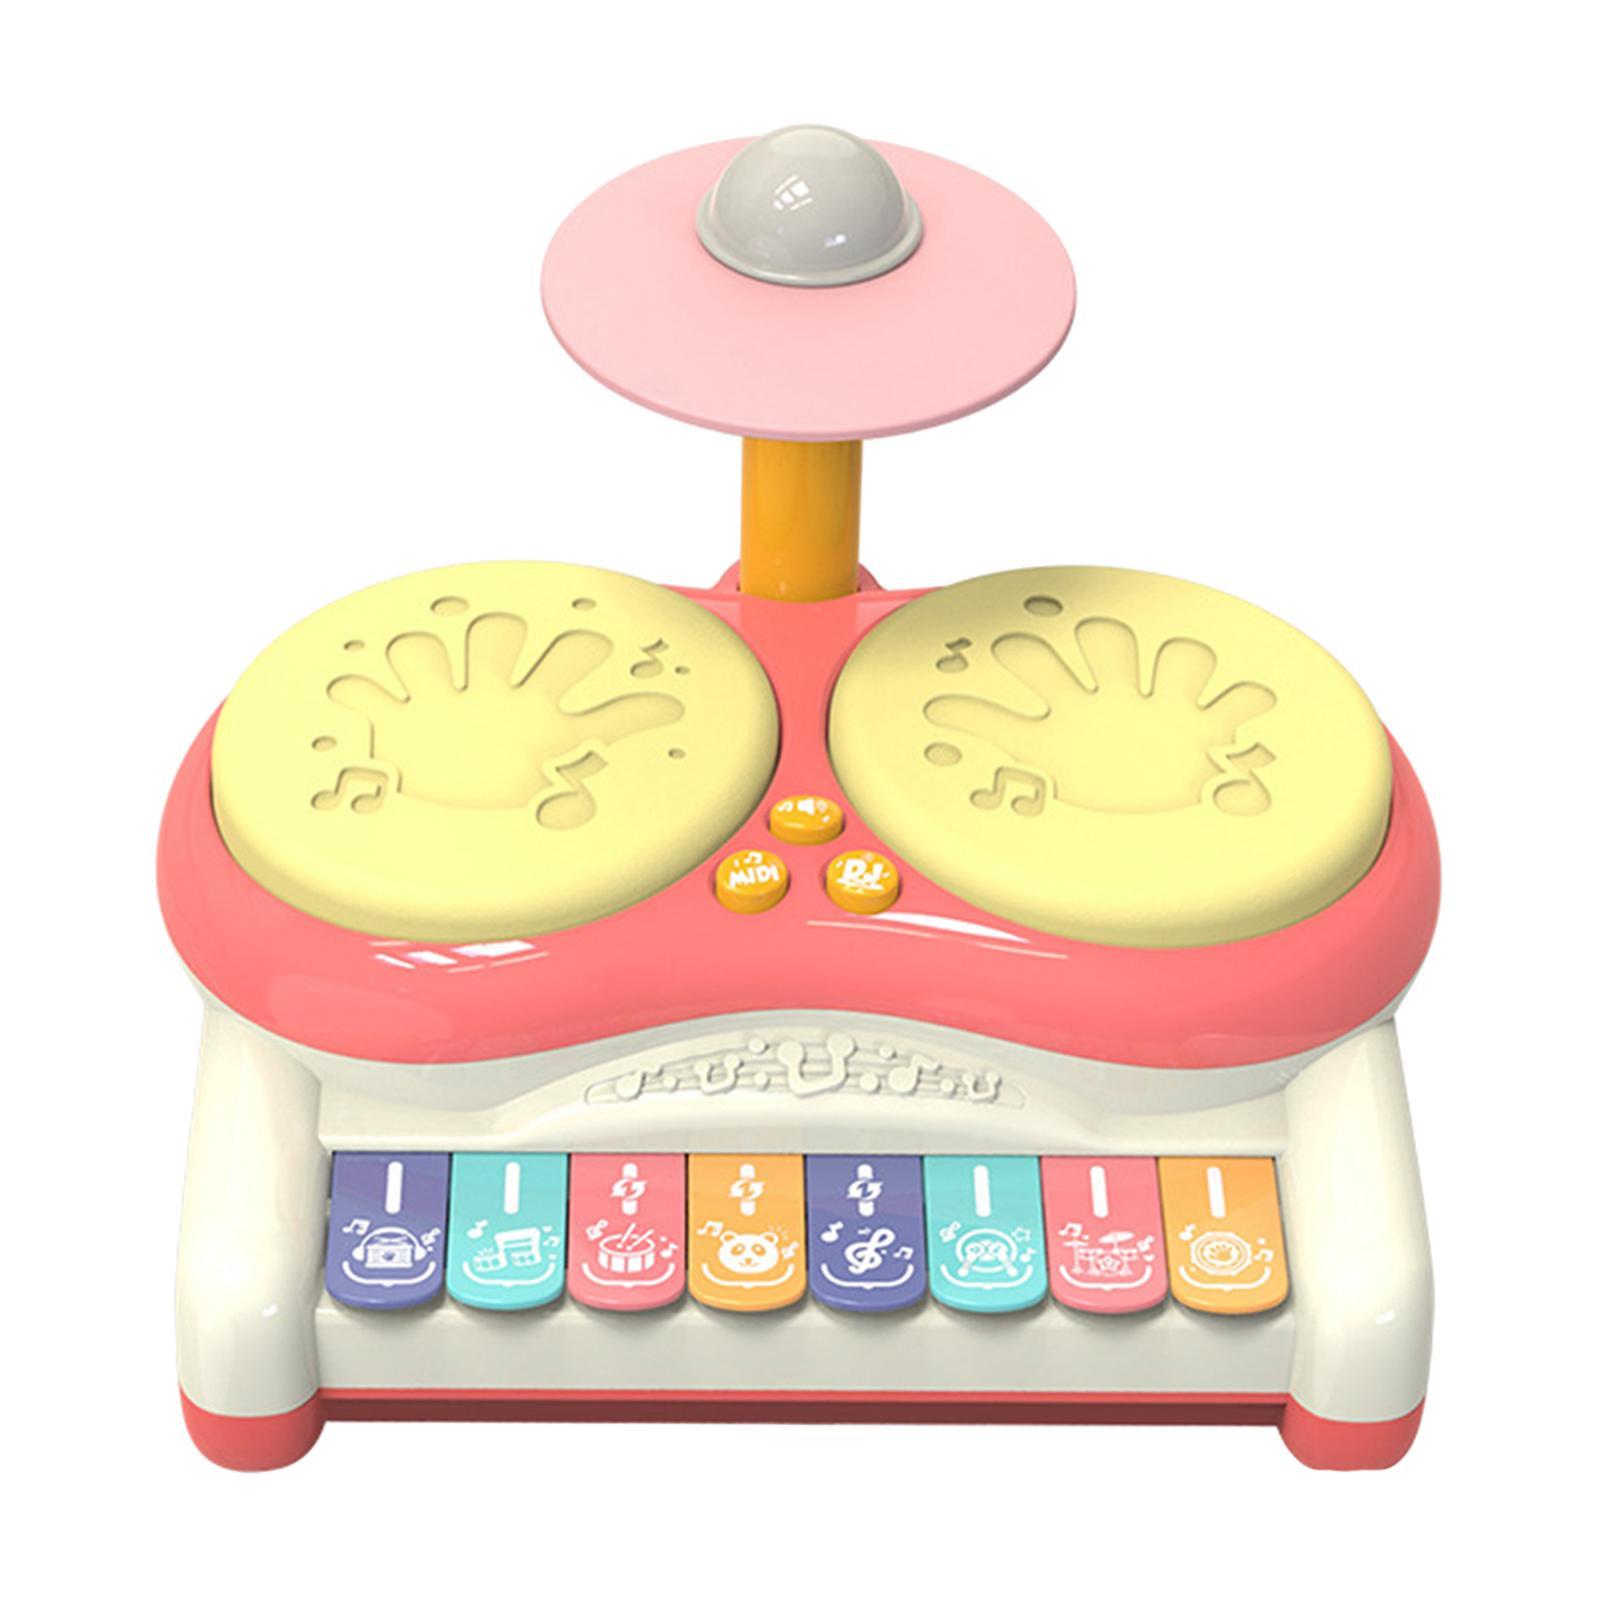 Drum Toy Early Education Musical Toy Training Educational for Child